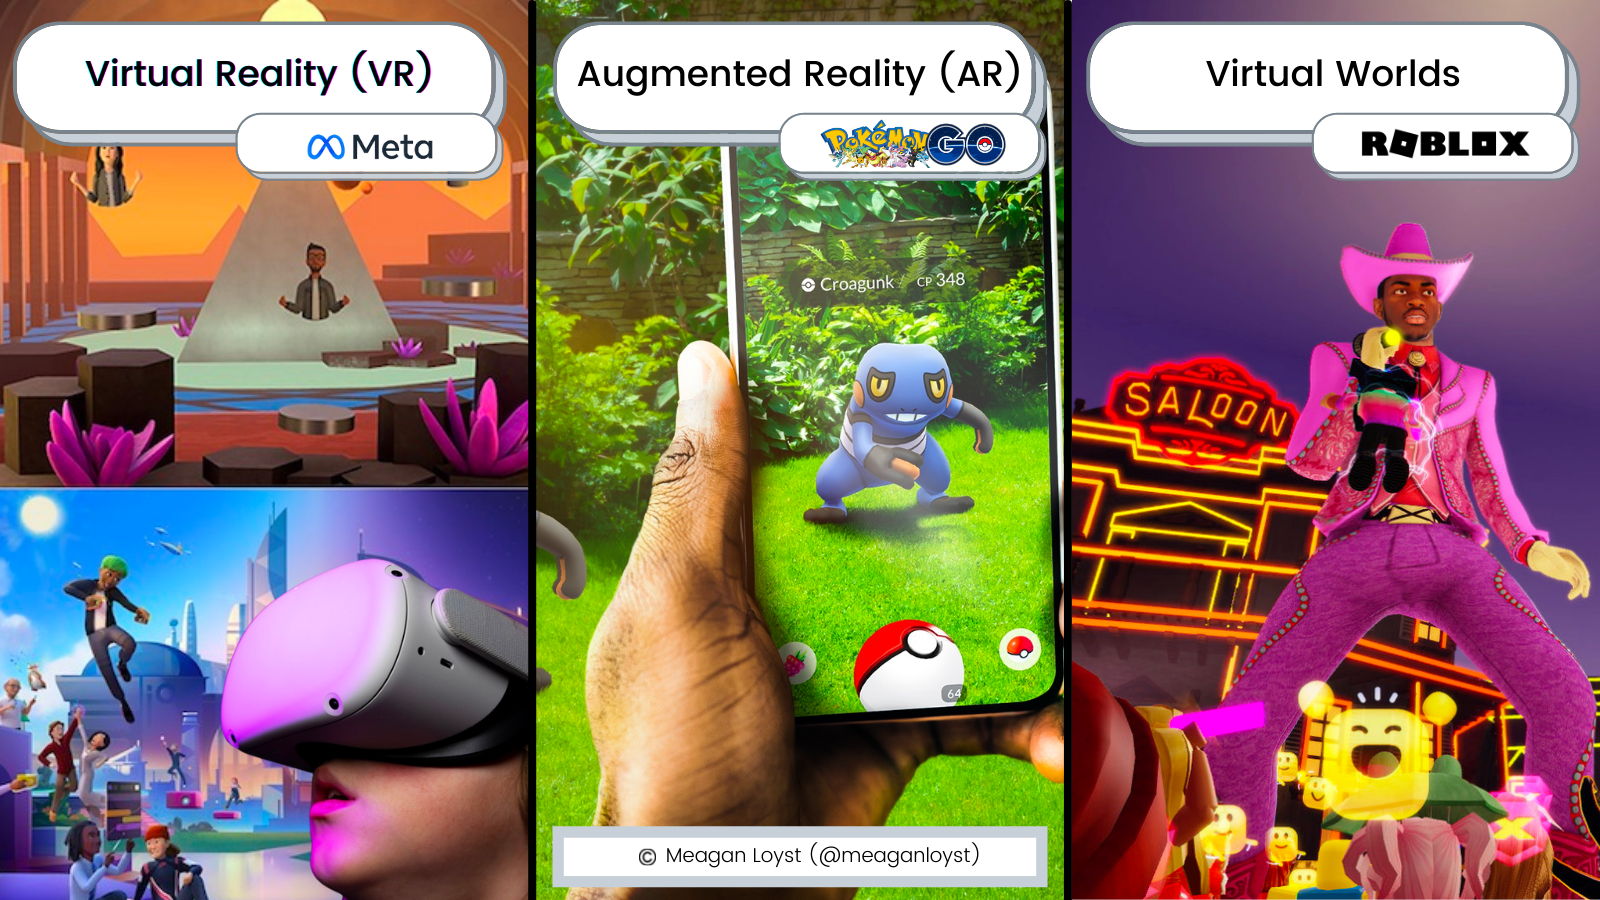 The segmentation of the metaverse: Virtual Reality, Augmented Reality, and Virtual Worlds